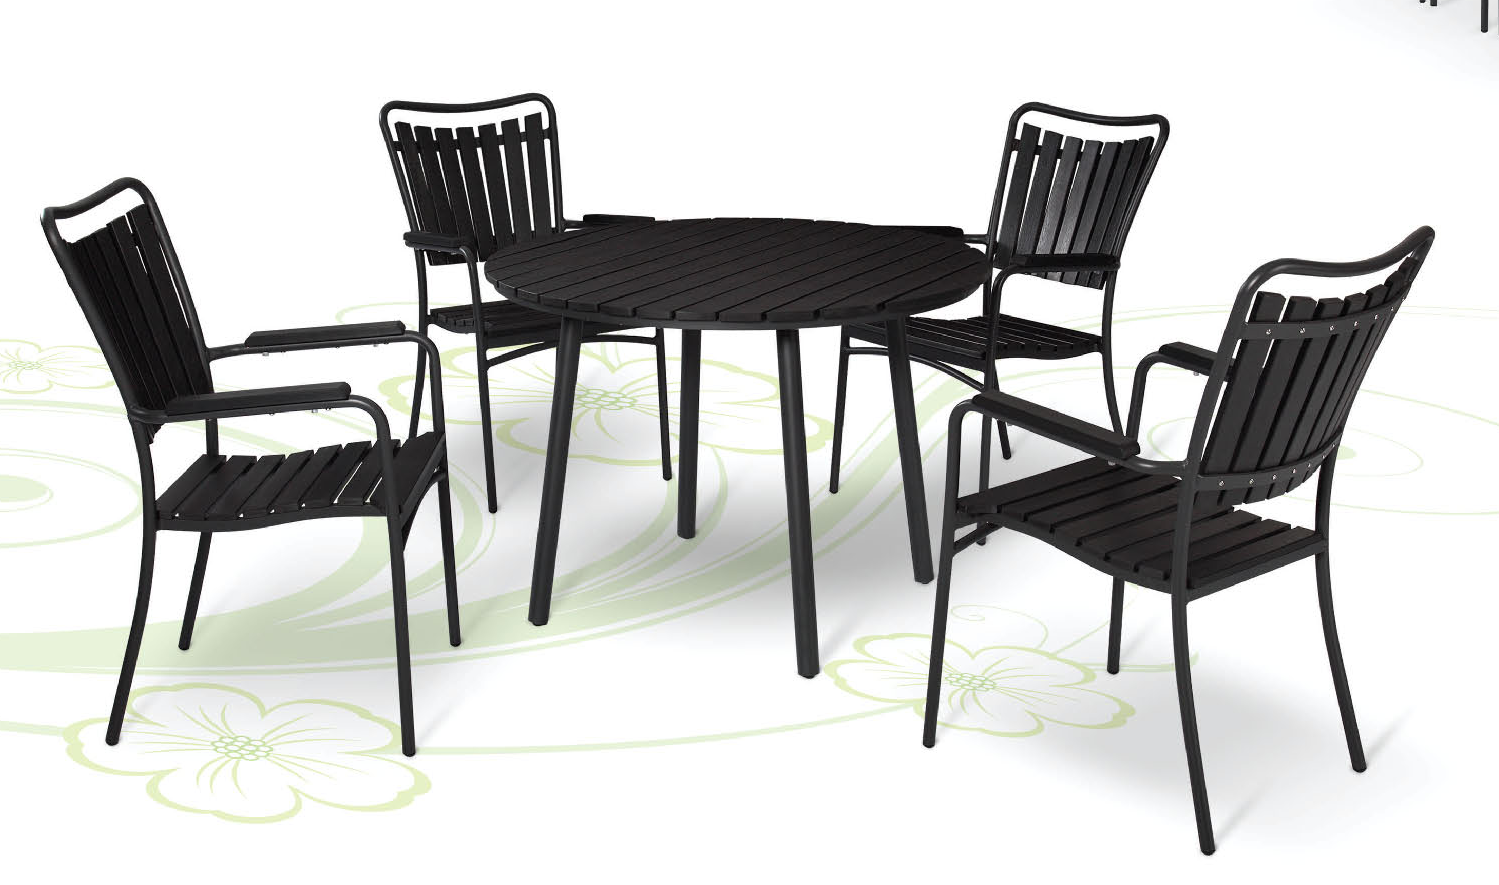 Bakelite Table Set - Table And Chairs, Transparent background PNG HD thumbnail